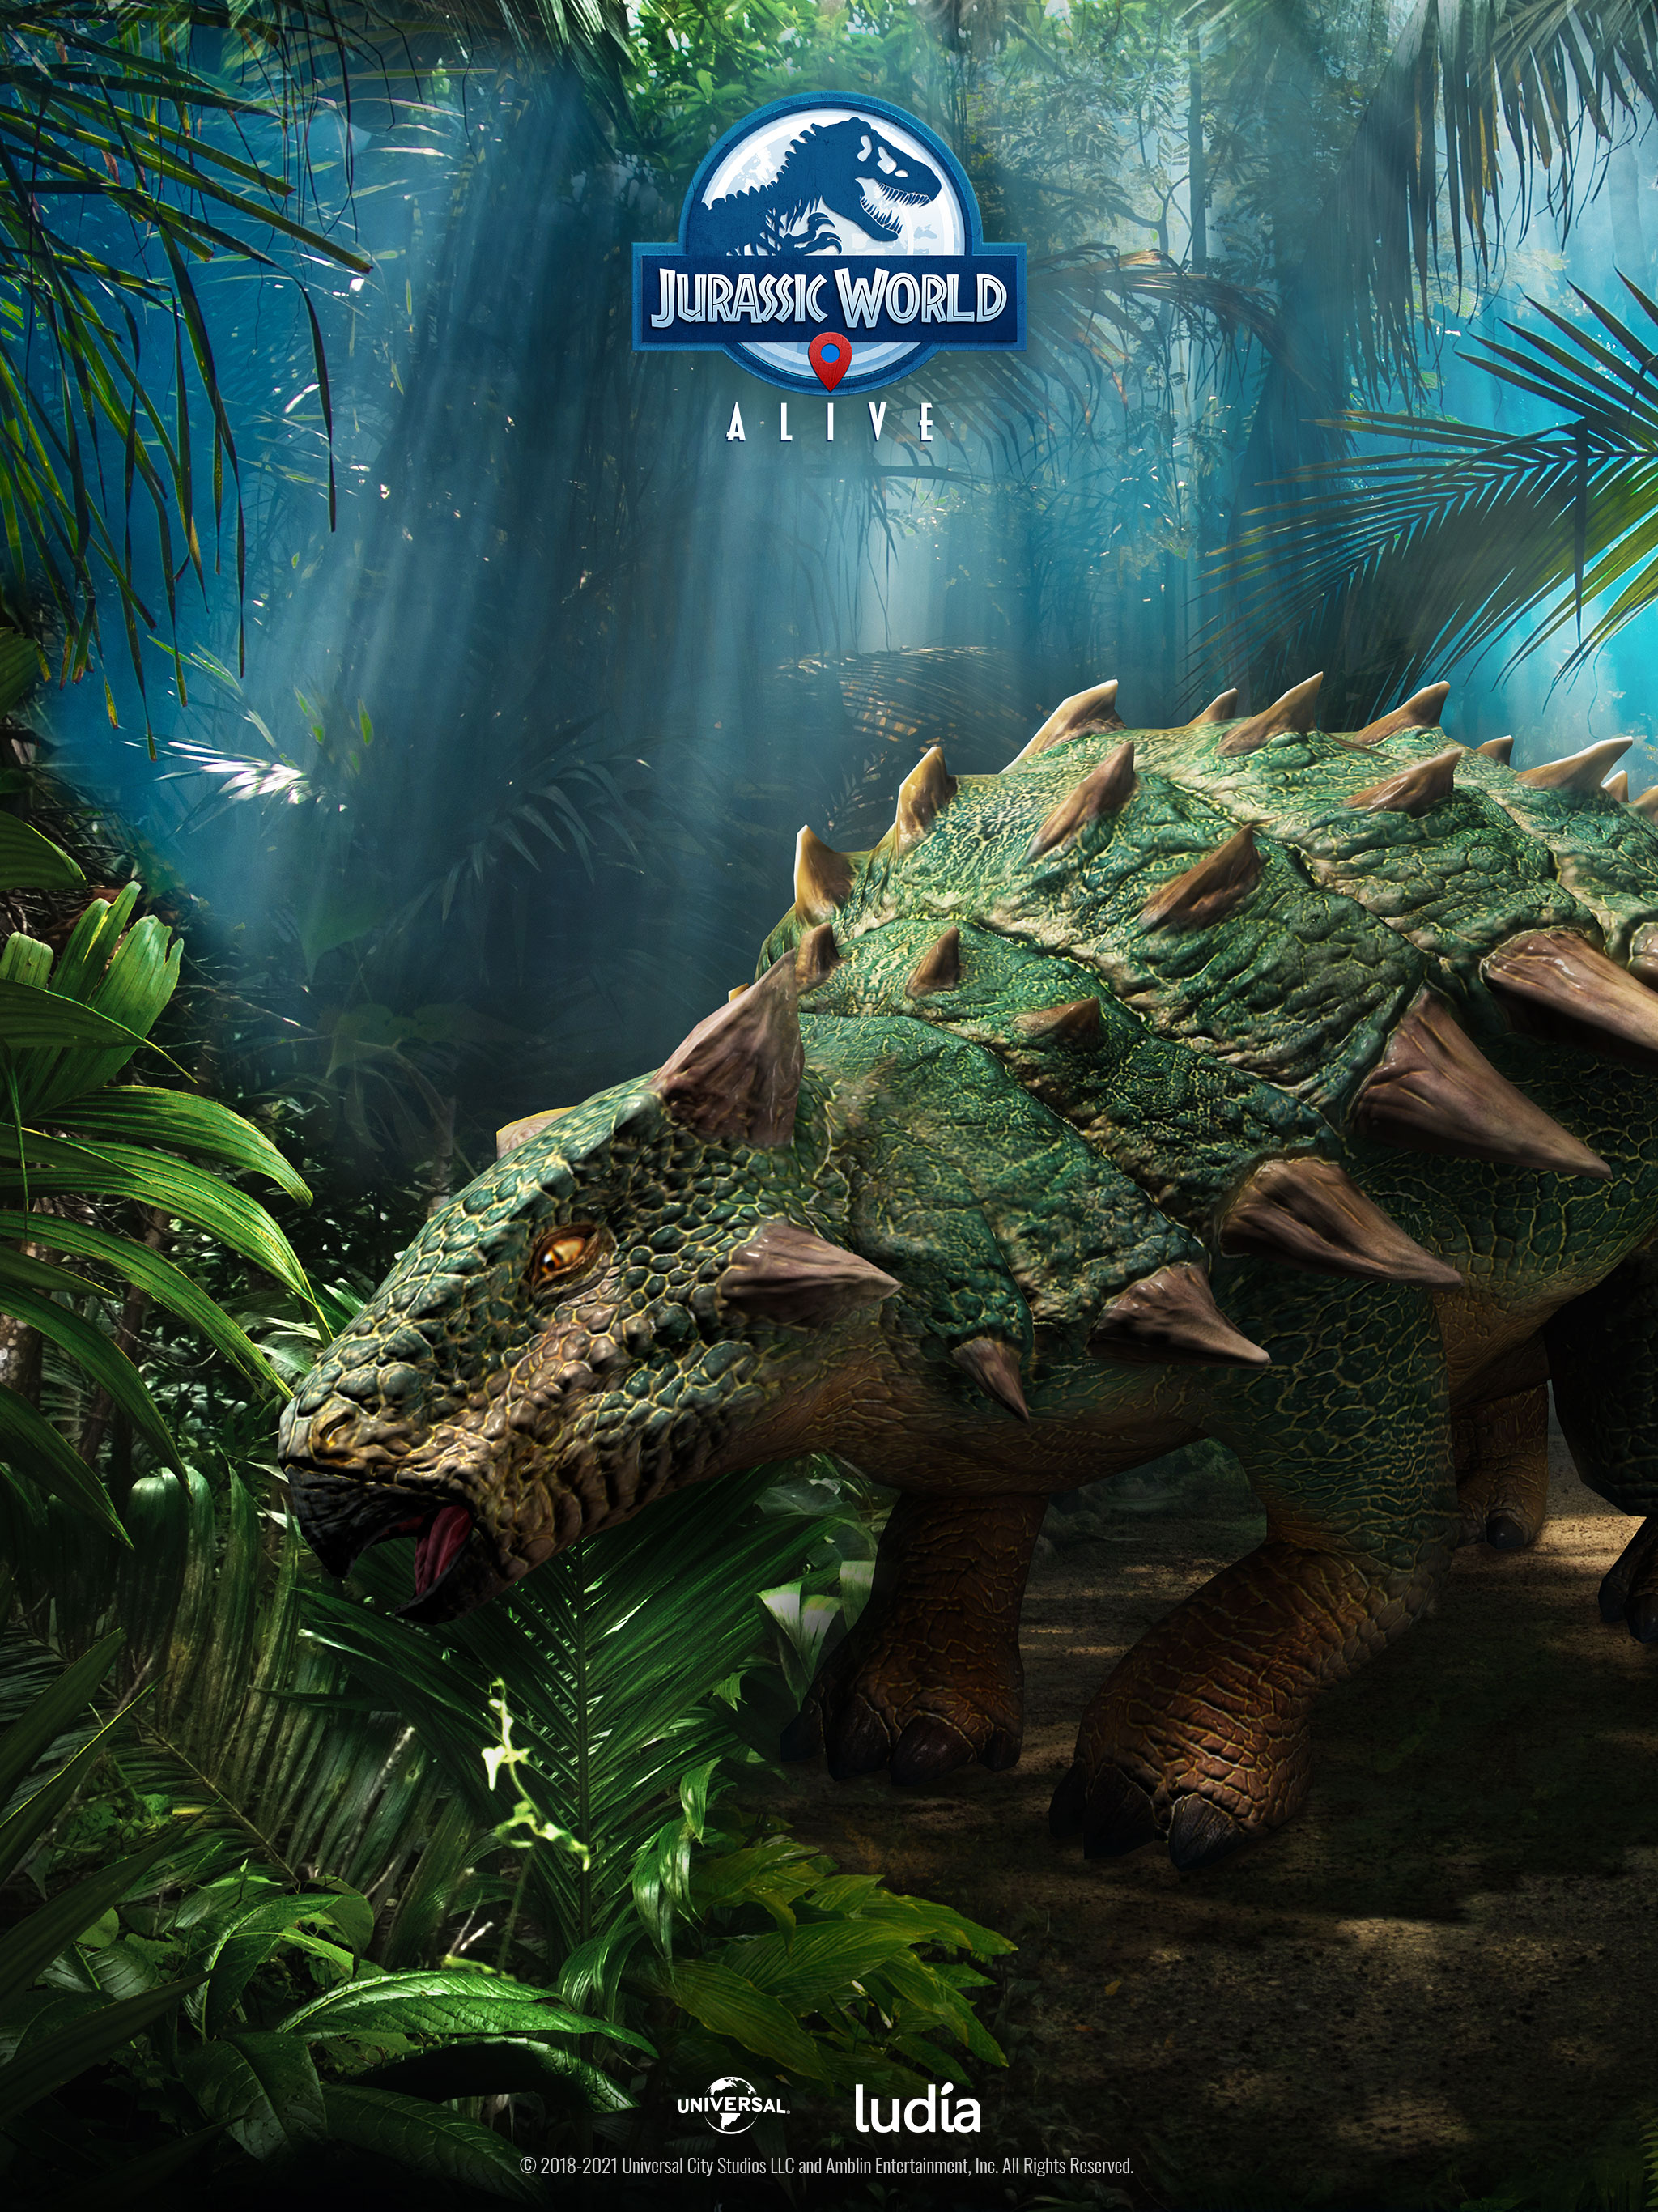 Jurassic World Alive on Twitter Take Jurassic World Alive with you with  these themed backgrounds Save or screenshot the image and enjoy  httpstcolBLl4BhbHM httpstcovhvuNNImh3  Twitter